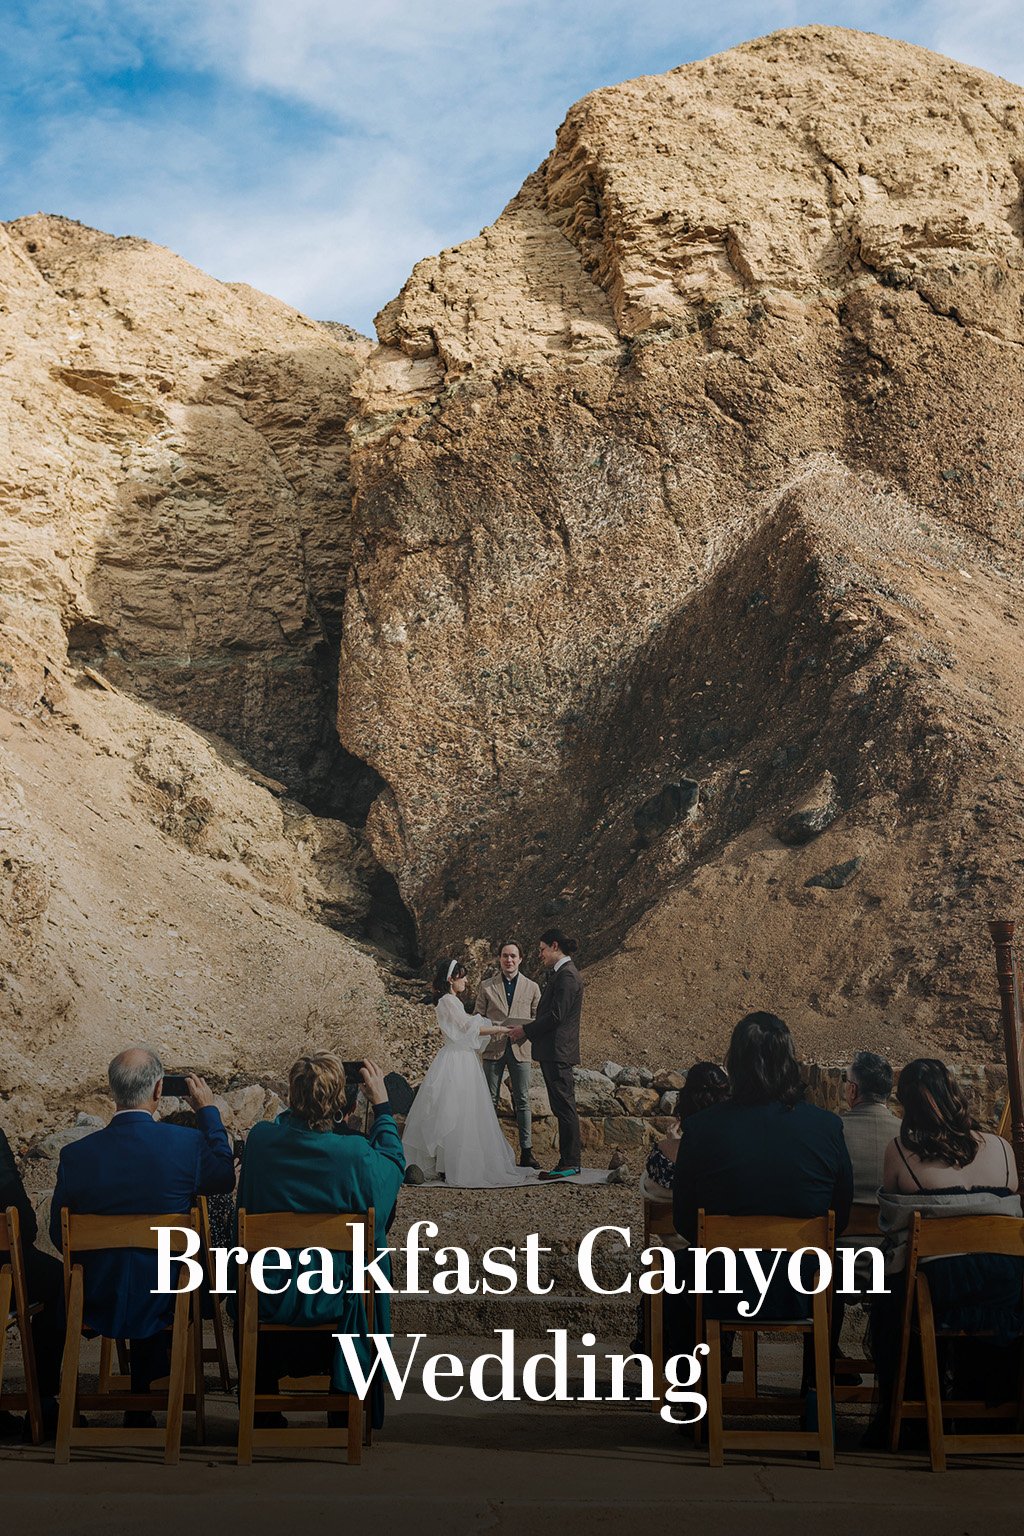 An image of a wedding with the text "Breakfast Canyon Wedding"